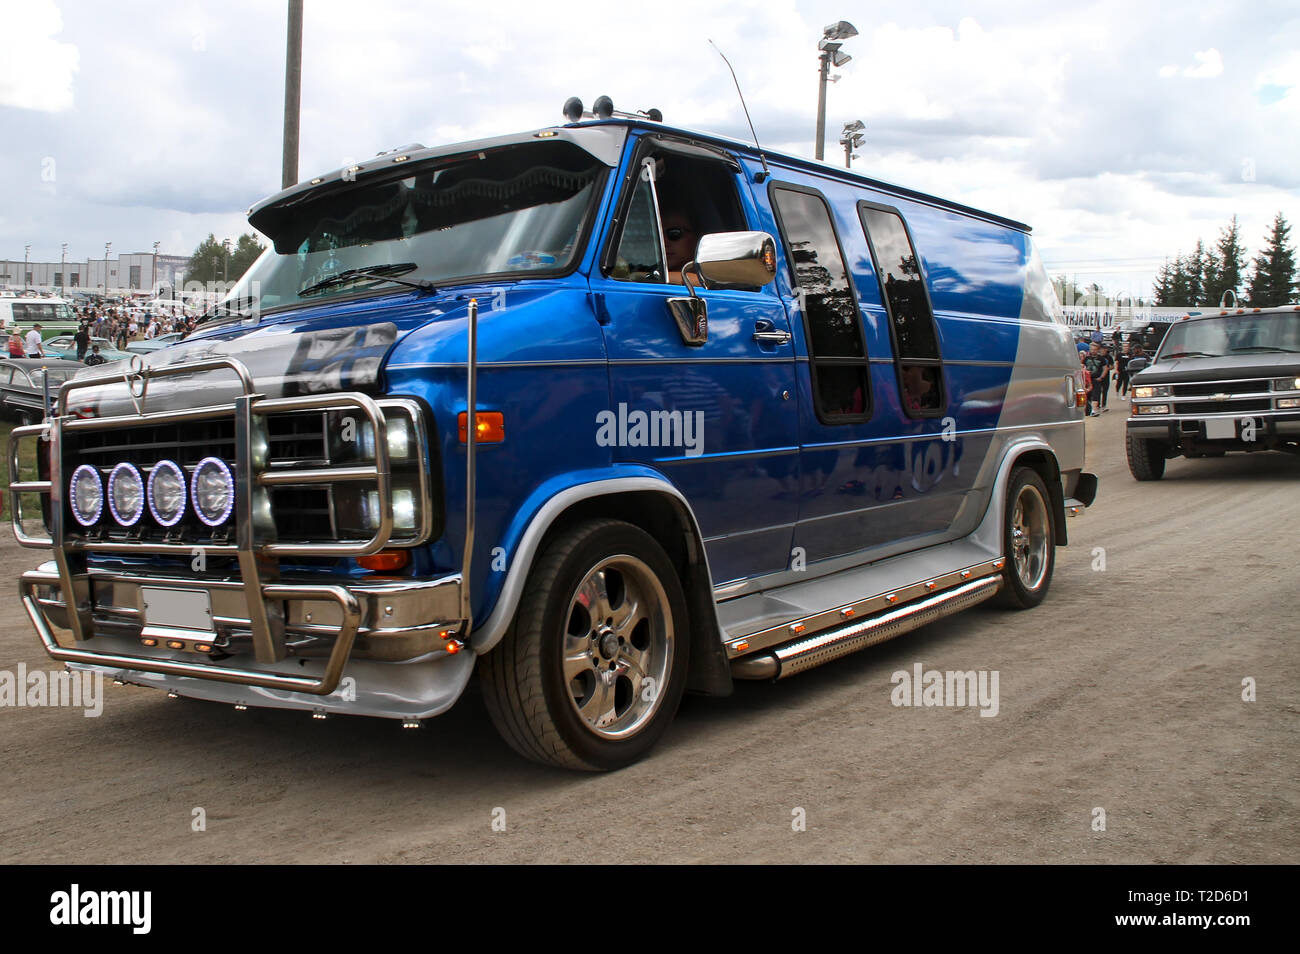 Blue customized Chevy Van G20 at Pick 